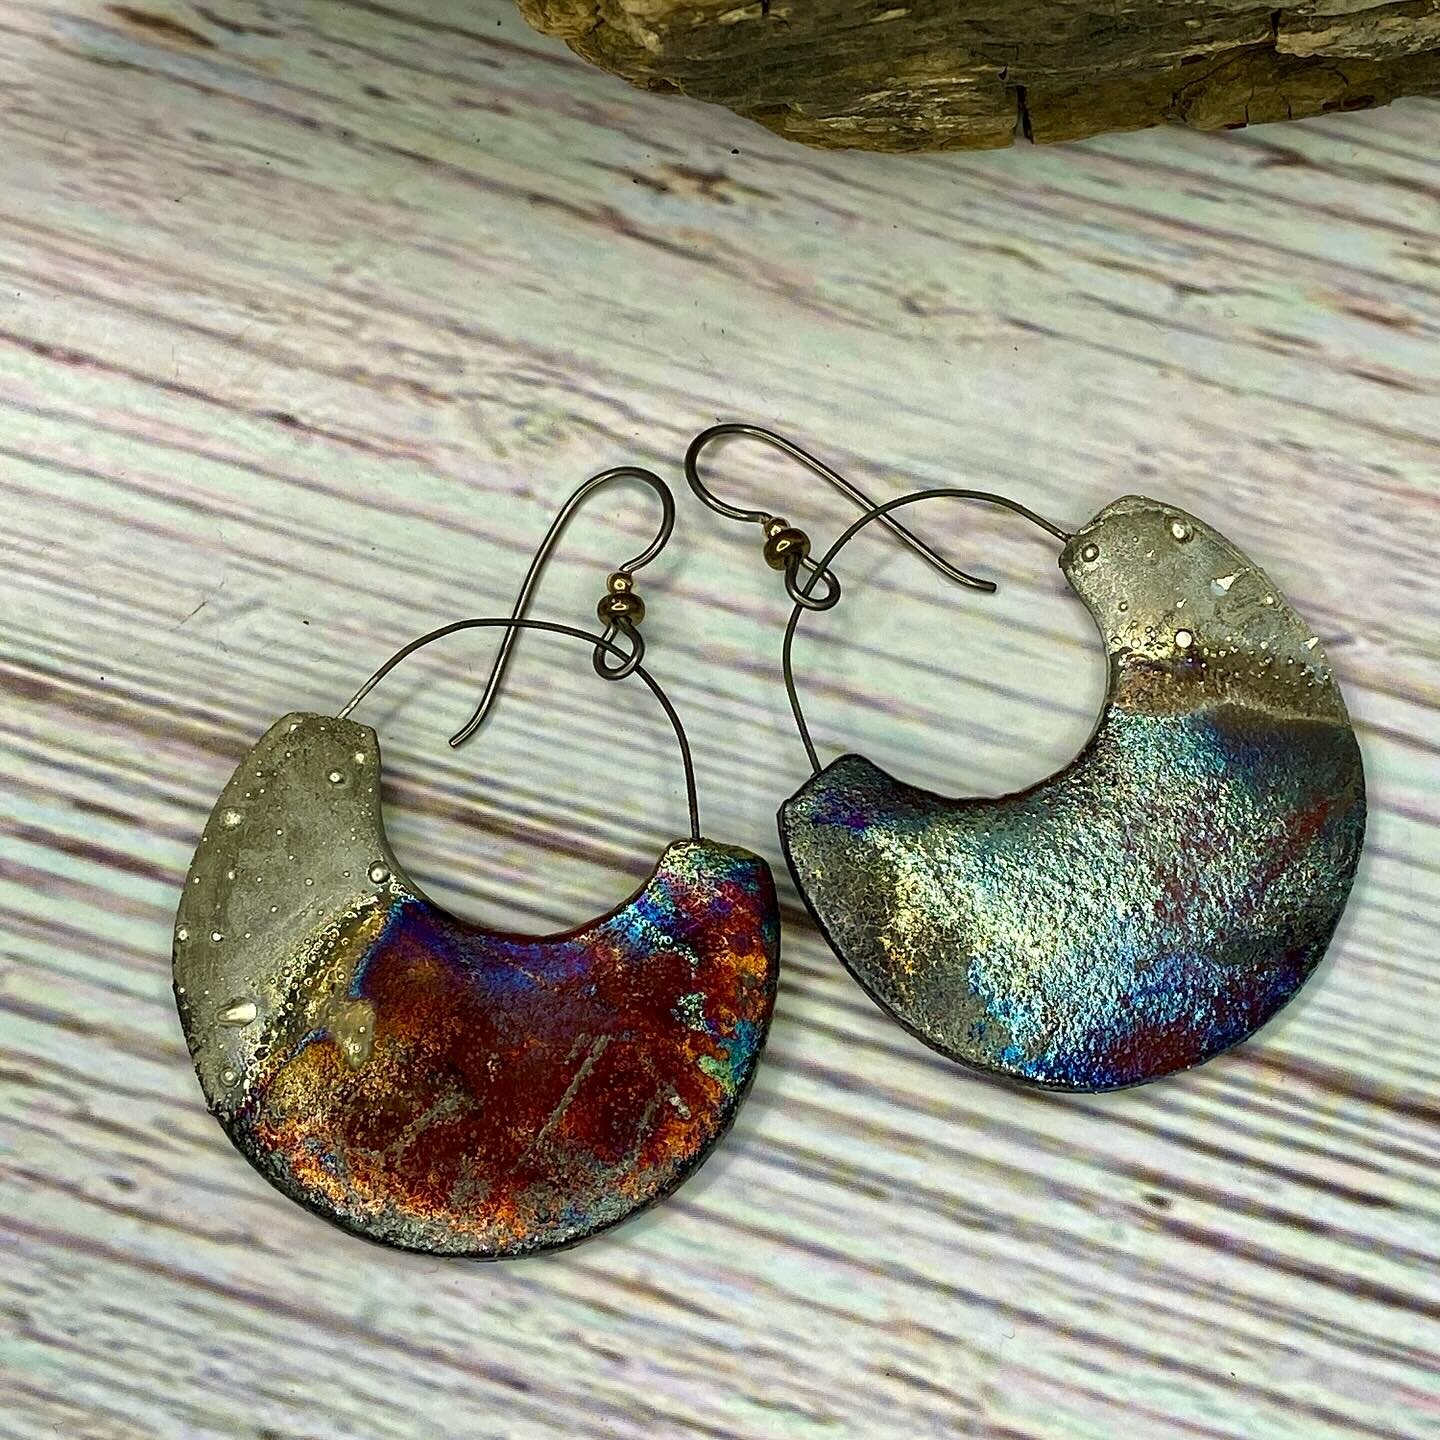 I love these Raku fired earrings!  They are listed on my website which is up and running with a lot of pretty things!  Link in bio.